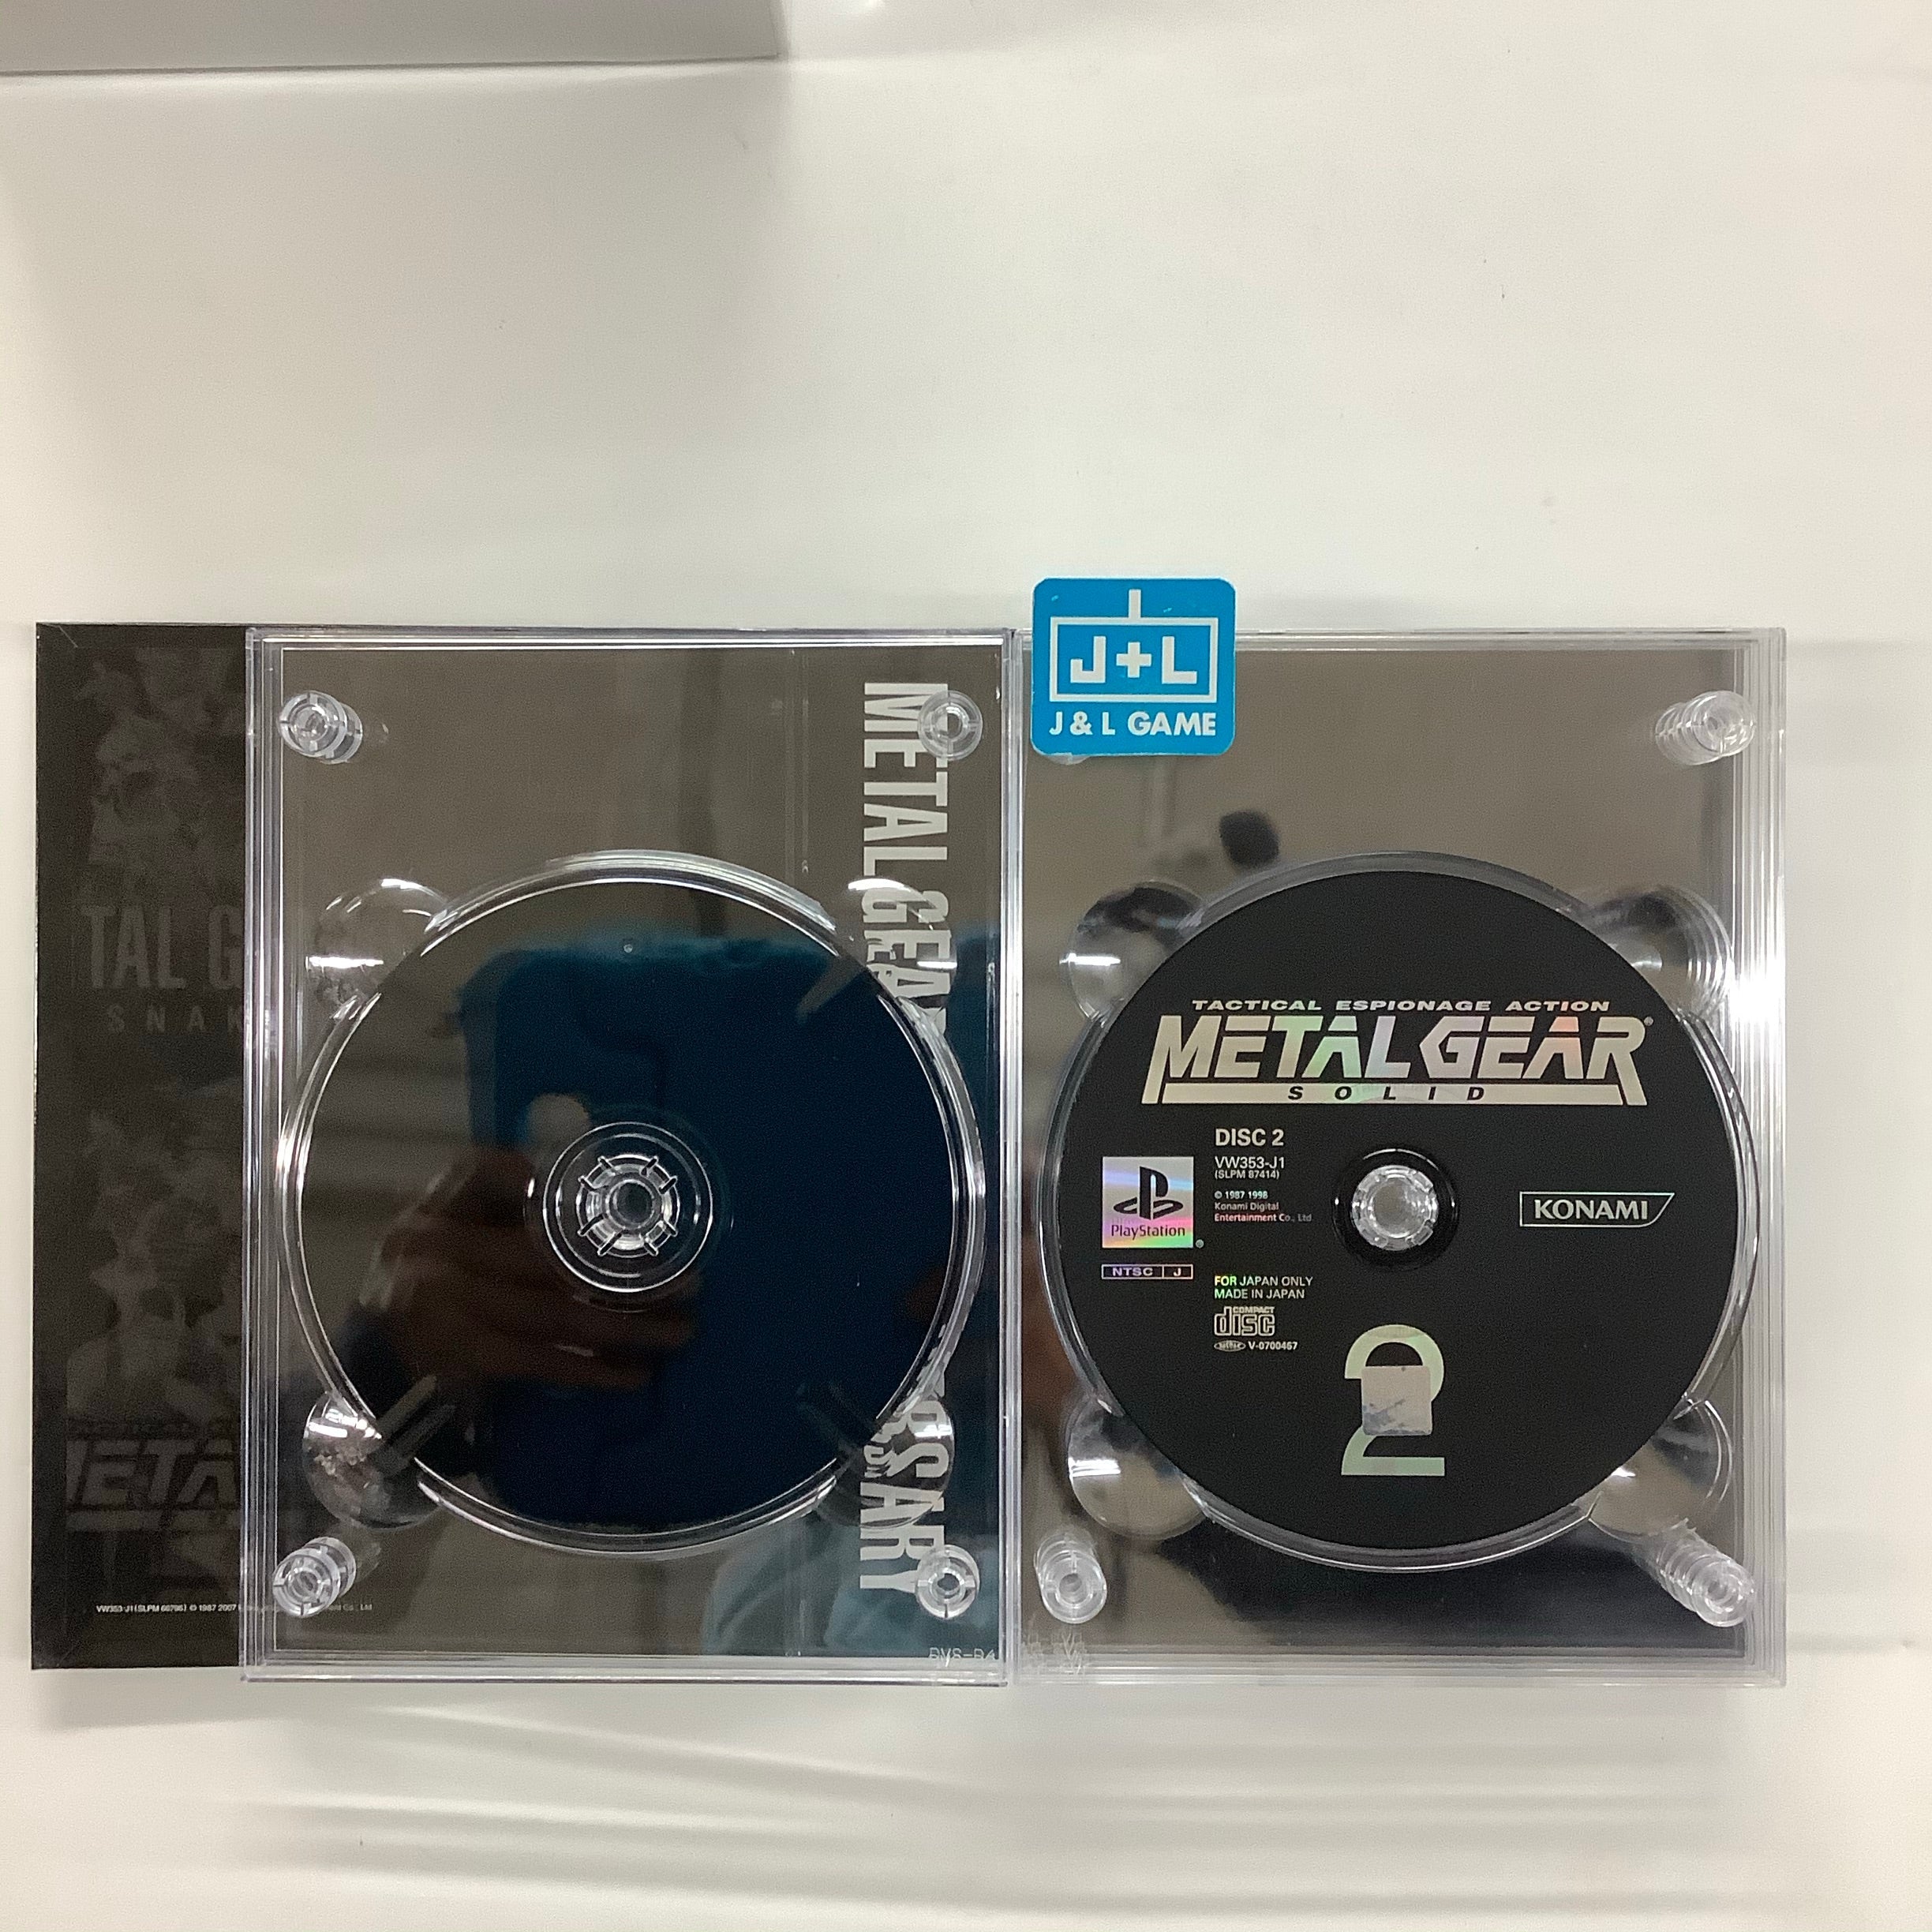 Metal Gear 20th Anniversary: Metal Gear Solid Collection - (PS2) PlayStation 2 [Pre-Owned] (Japanese Import) Video Games Konami   